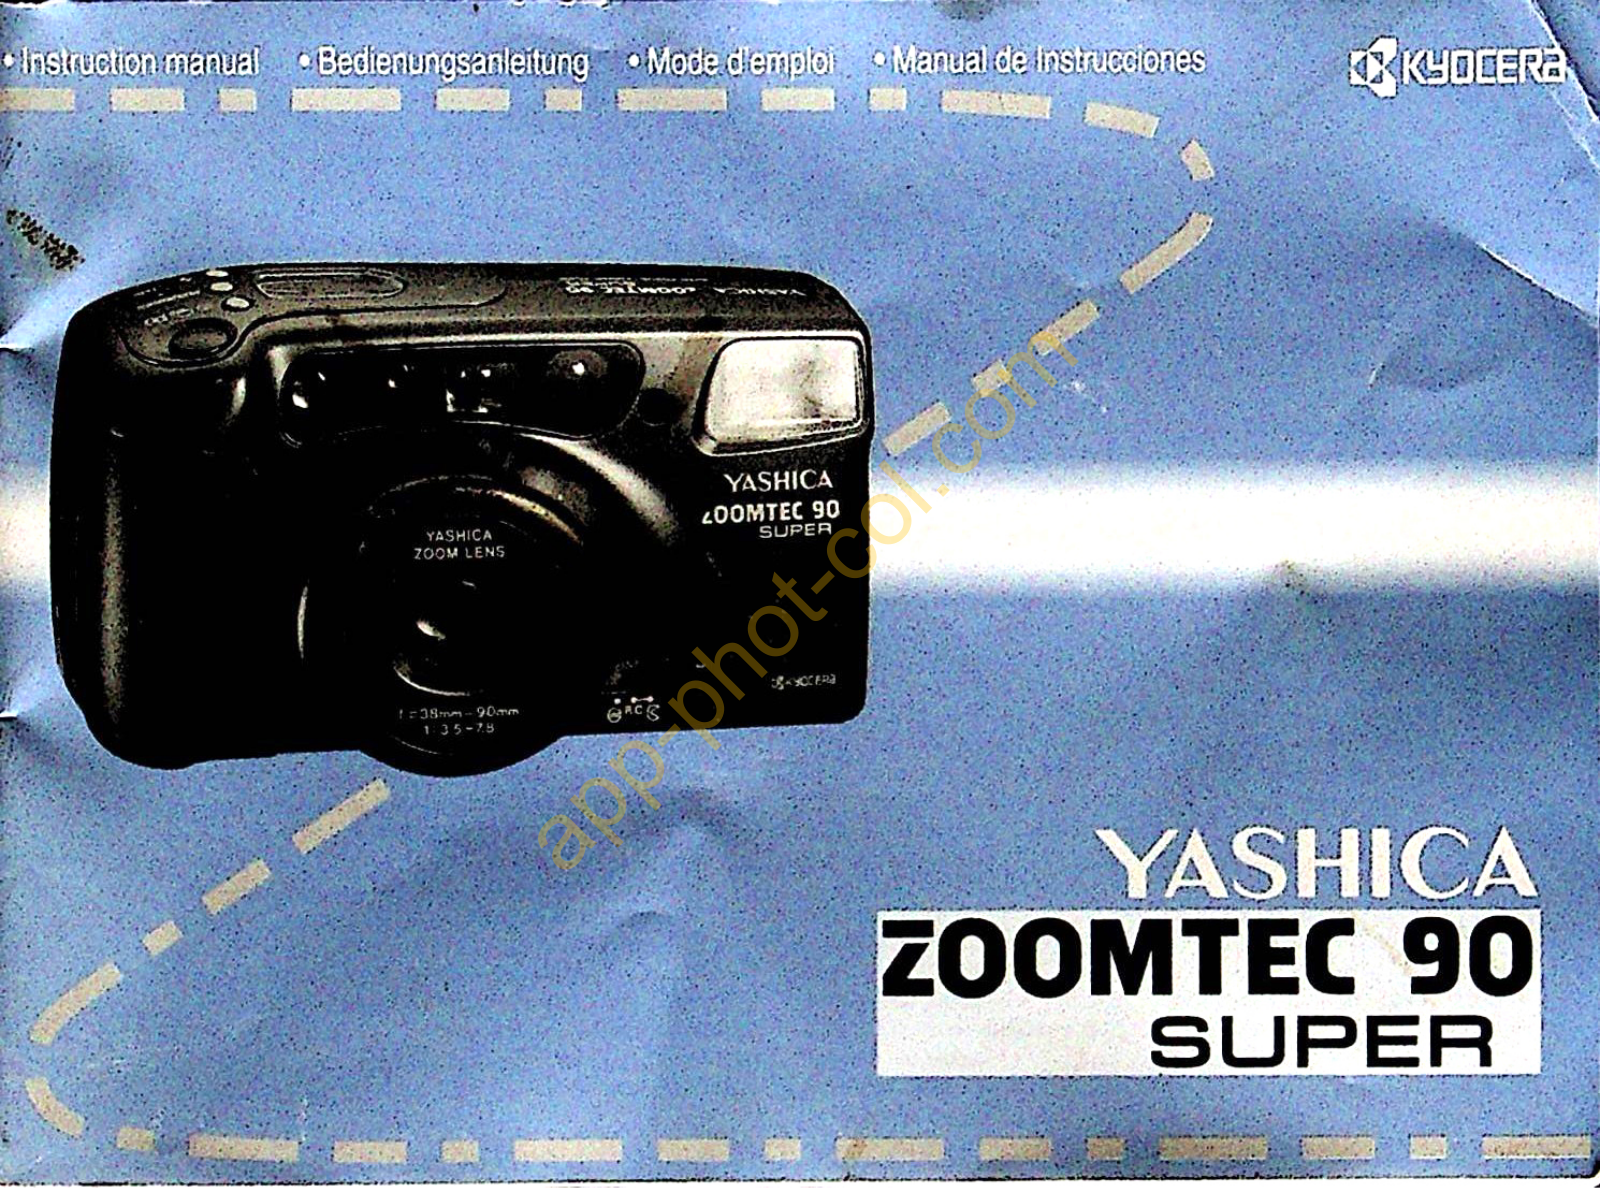 Yashica Zoomtec 90 Super Operating Guide